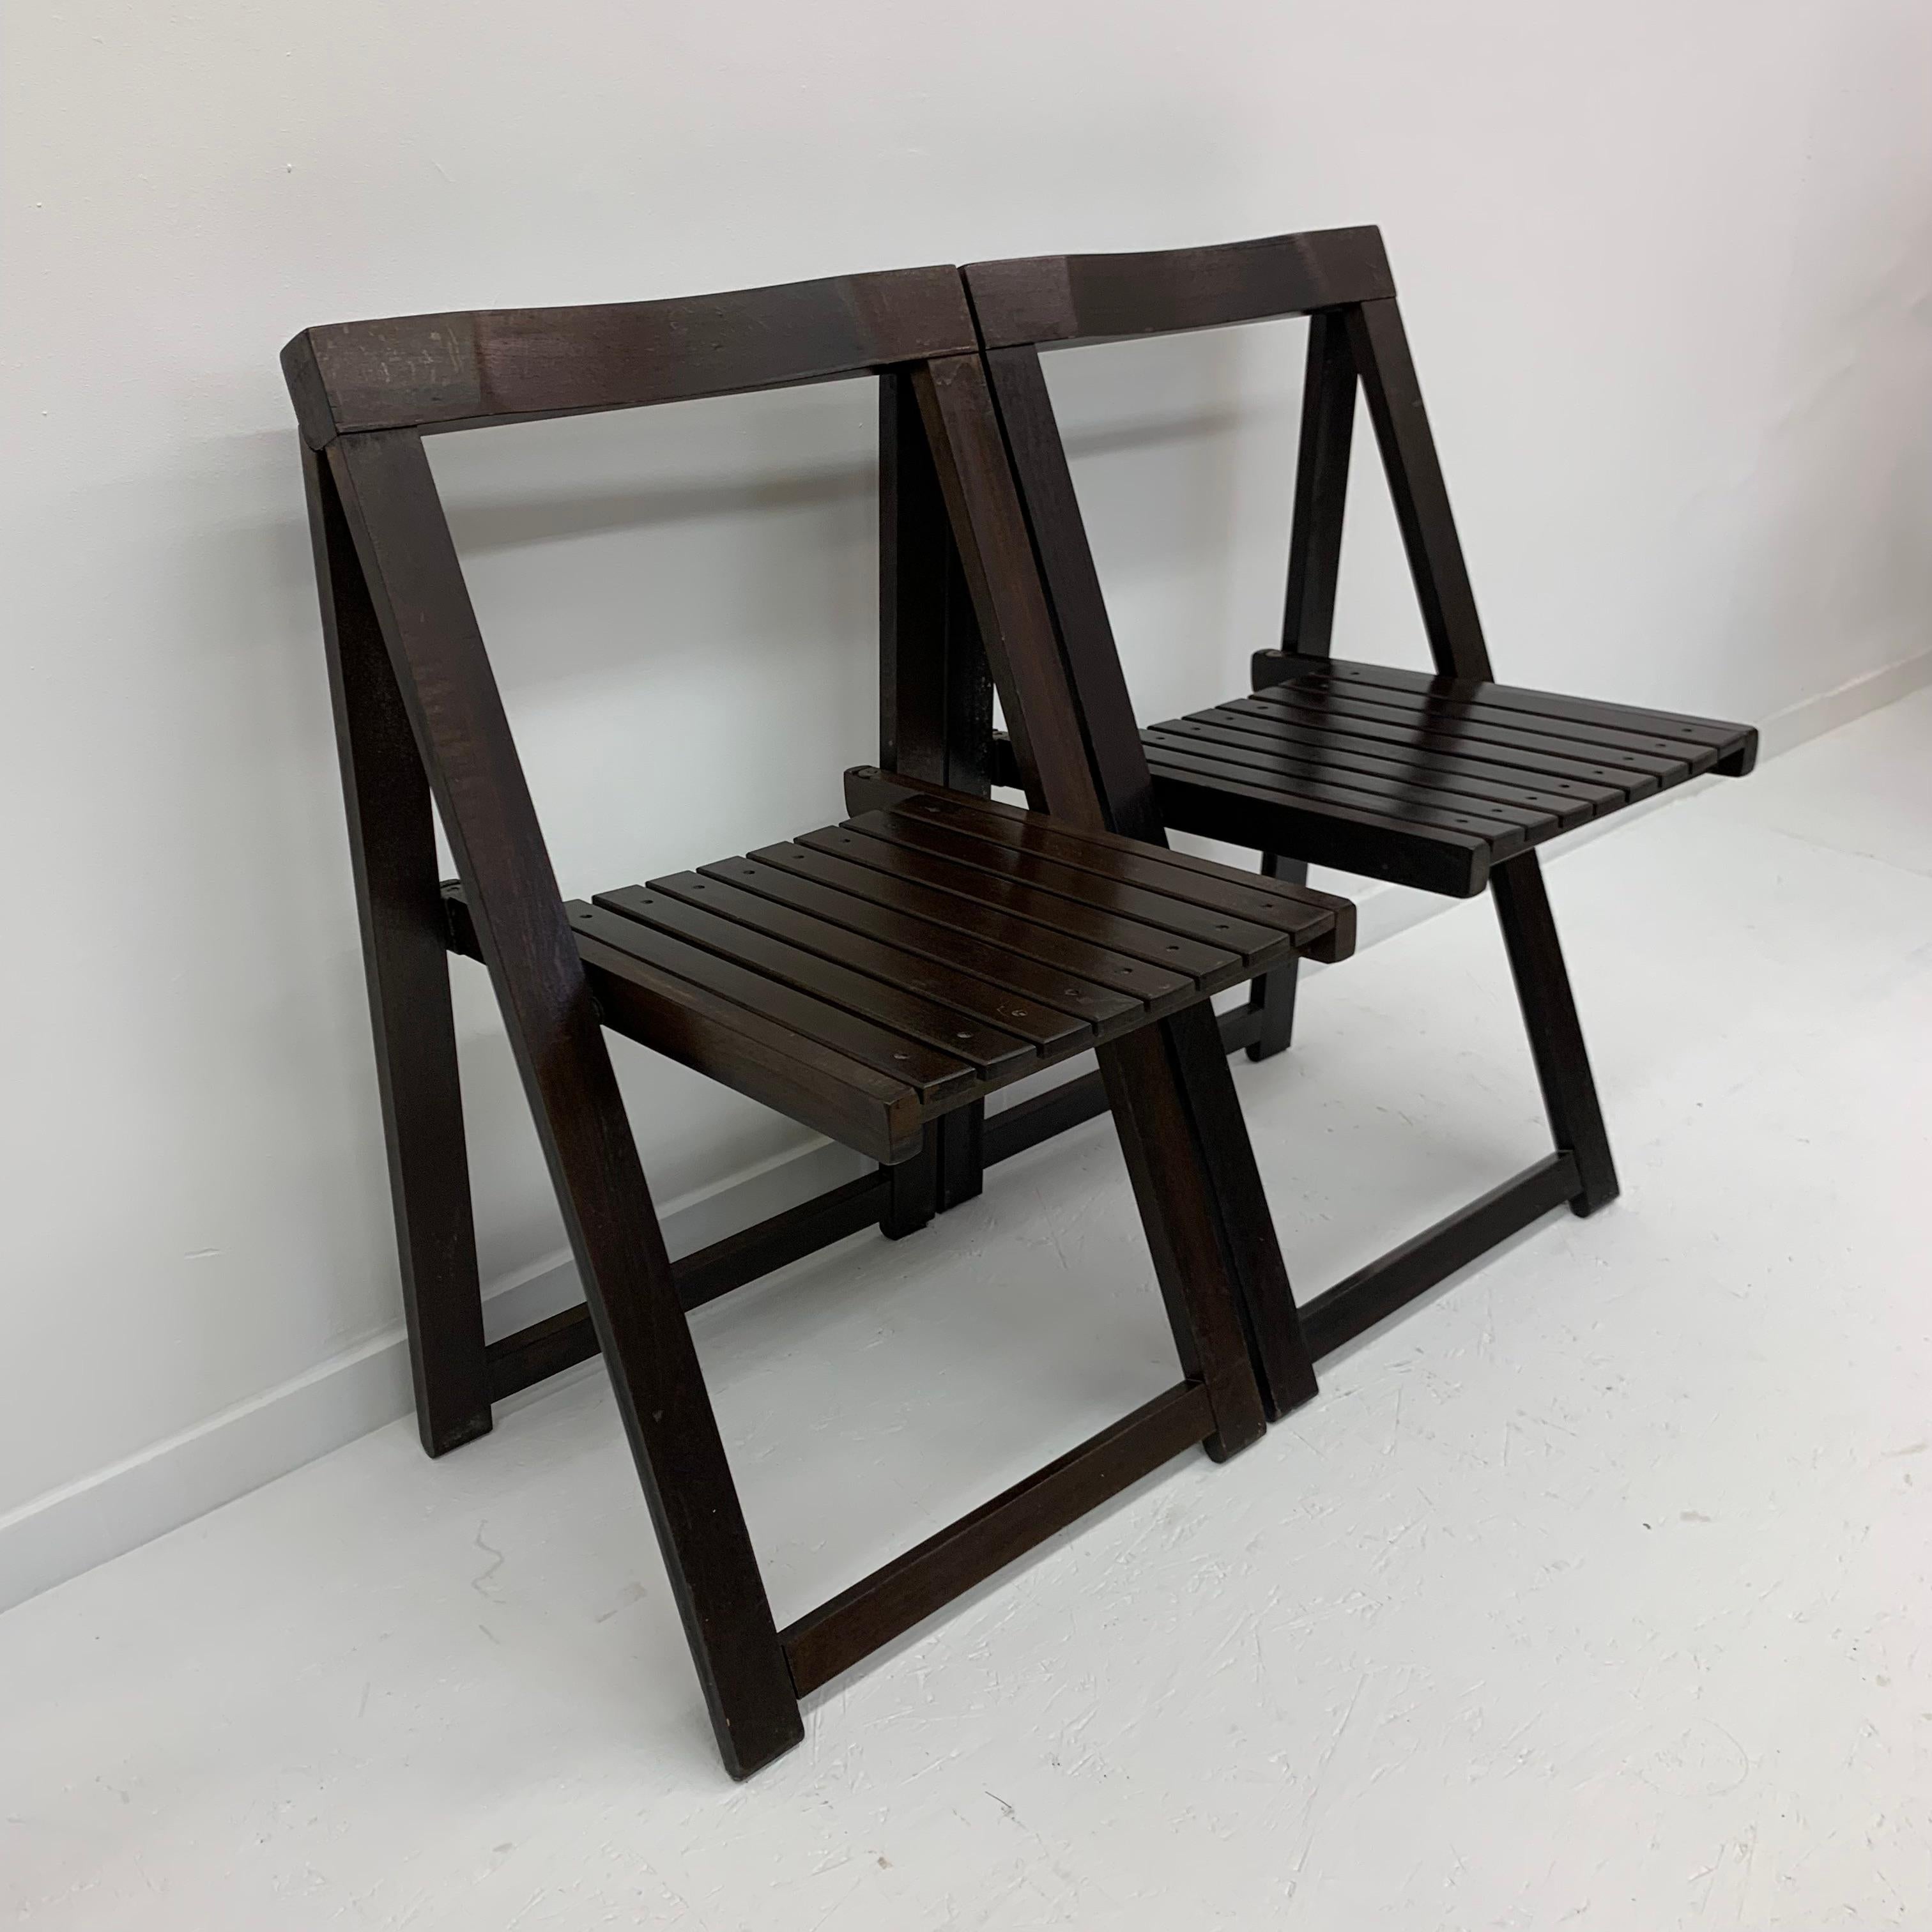 Set of 2 Aldo Jacober for Alberto Bazzani wooden folding chairs, 1960’s For Sale 1